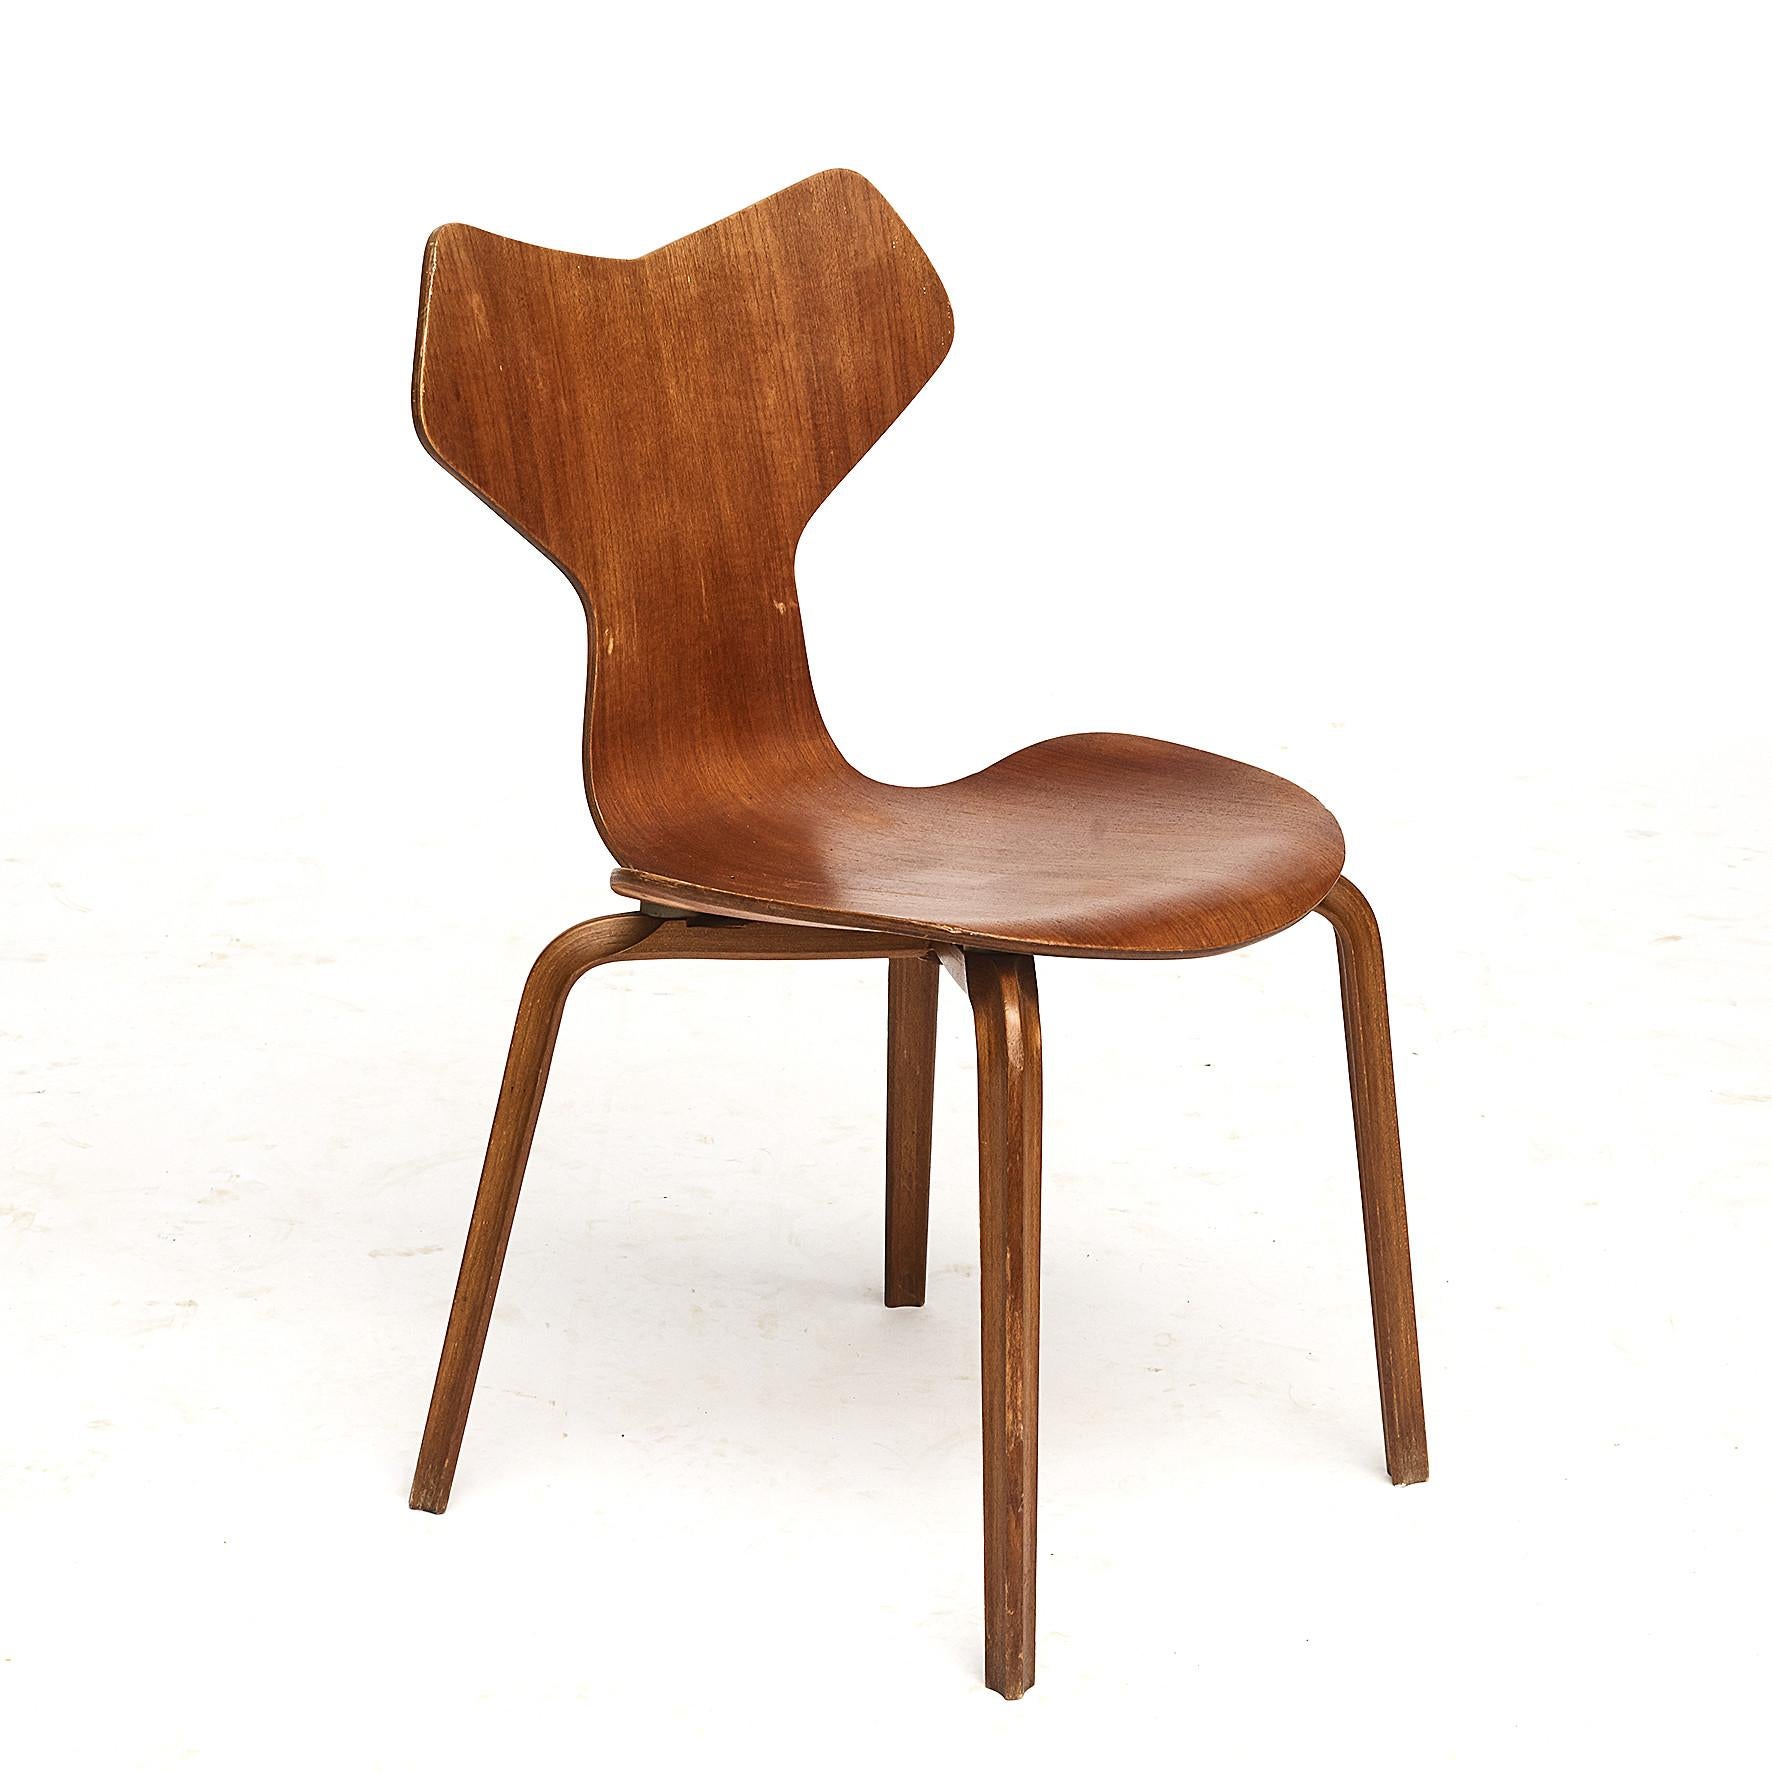 A set of six teak Grand Prix chairs designed by Arne Jacobsen. Manufactured by Fritz Hansen, Denmark, 1960s.
Each piece is in good original vintage condition and has some wear consistent with age and use.
Sold as a set of six.